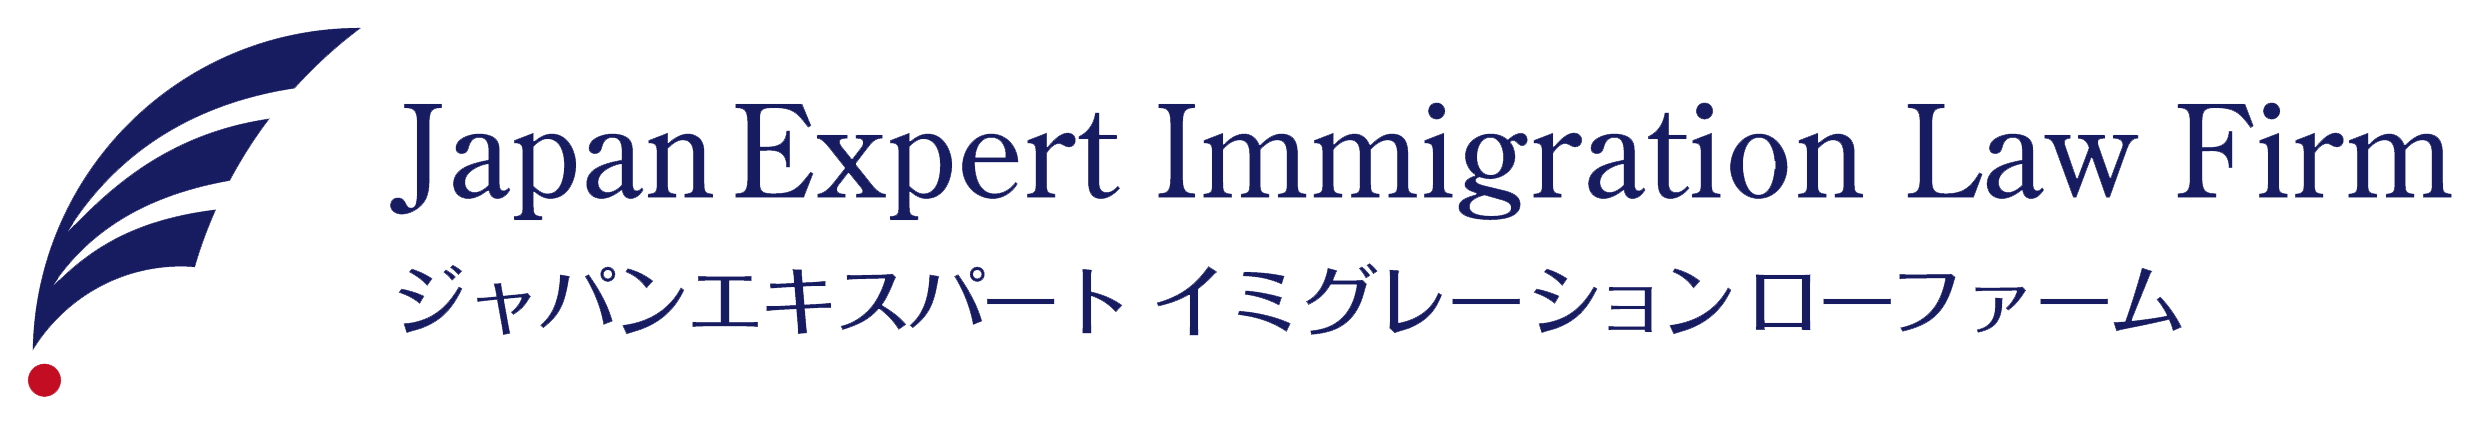 Examples of Successful Cases｜行政書士法人Japan Expert Immigration Law Firm